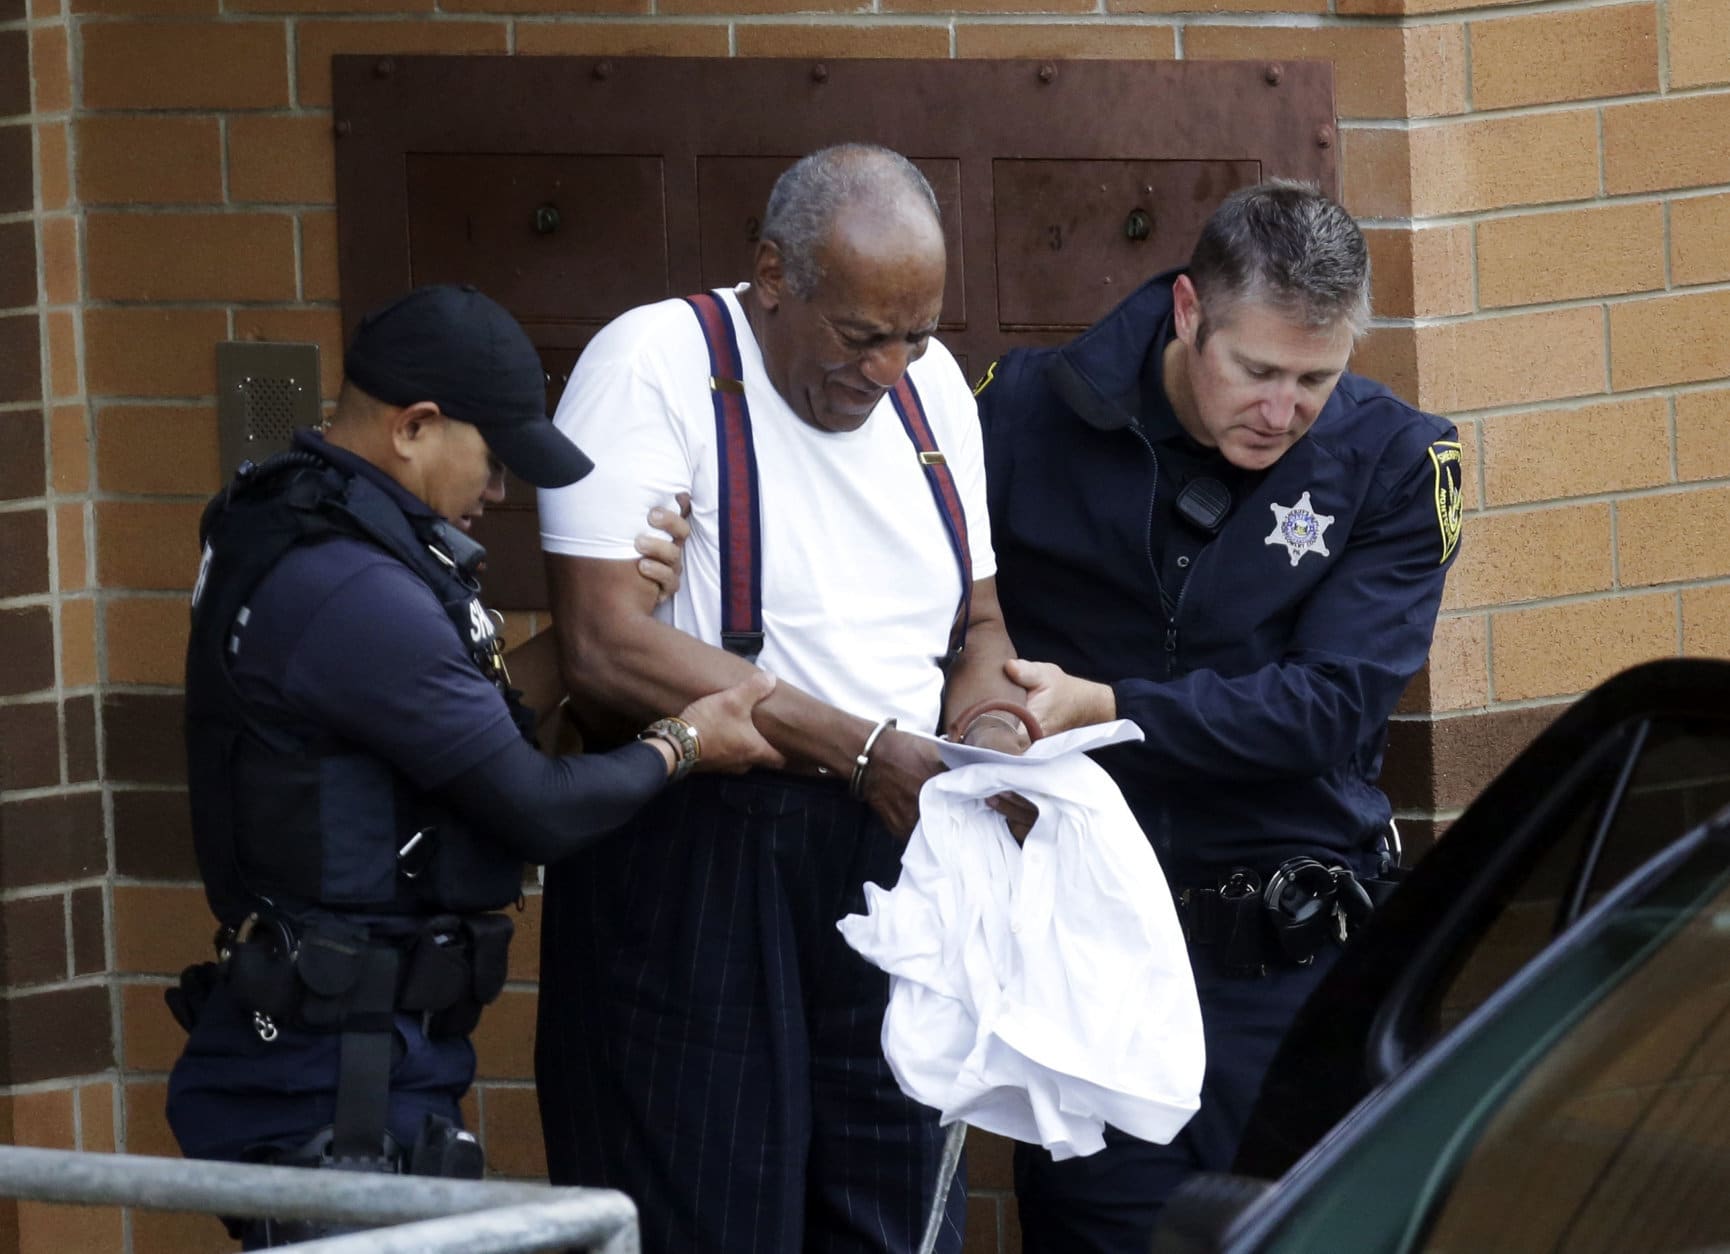 Bill Cosby is escorted out of the Montgomery County Correctional Facility in Eagleville, Pa., on Sept. 25, 2018, following his sentencing to a three-to-10-year prison sentence for sexual assault. (AP Photo/Jacqueline Larma)